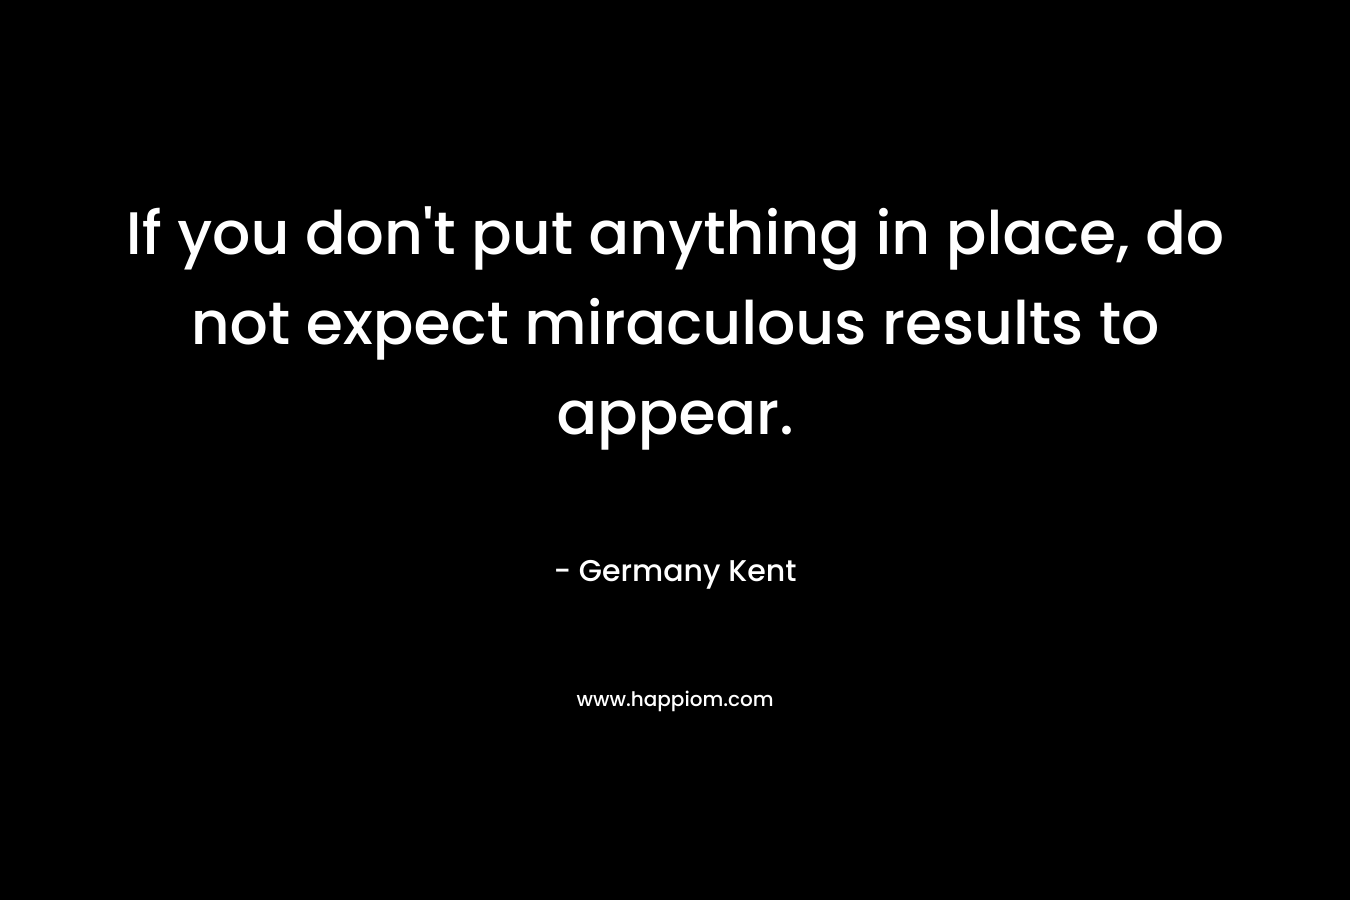 If you don't put anything in place, do not expect miraculous results to appear.